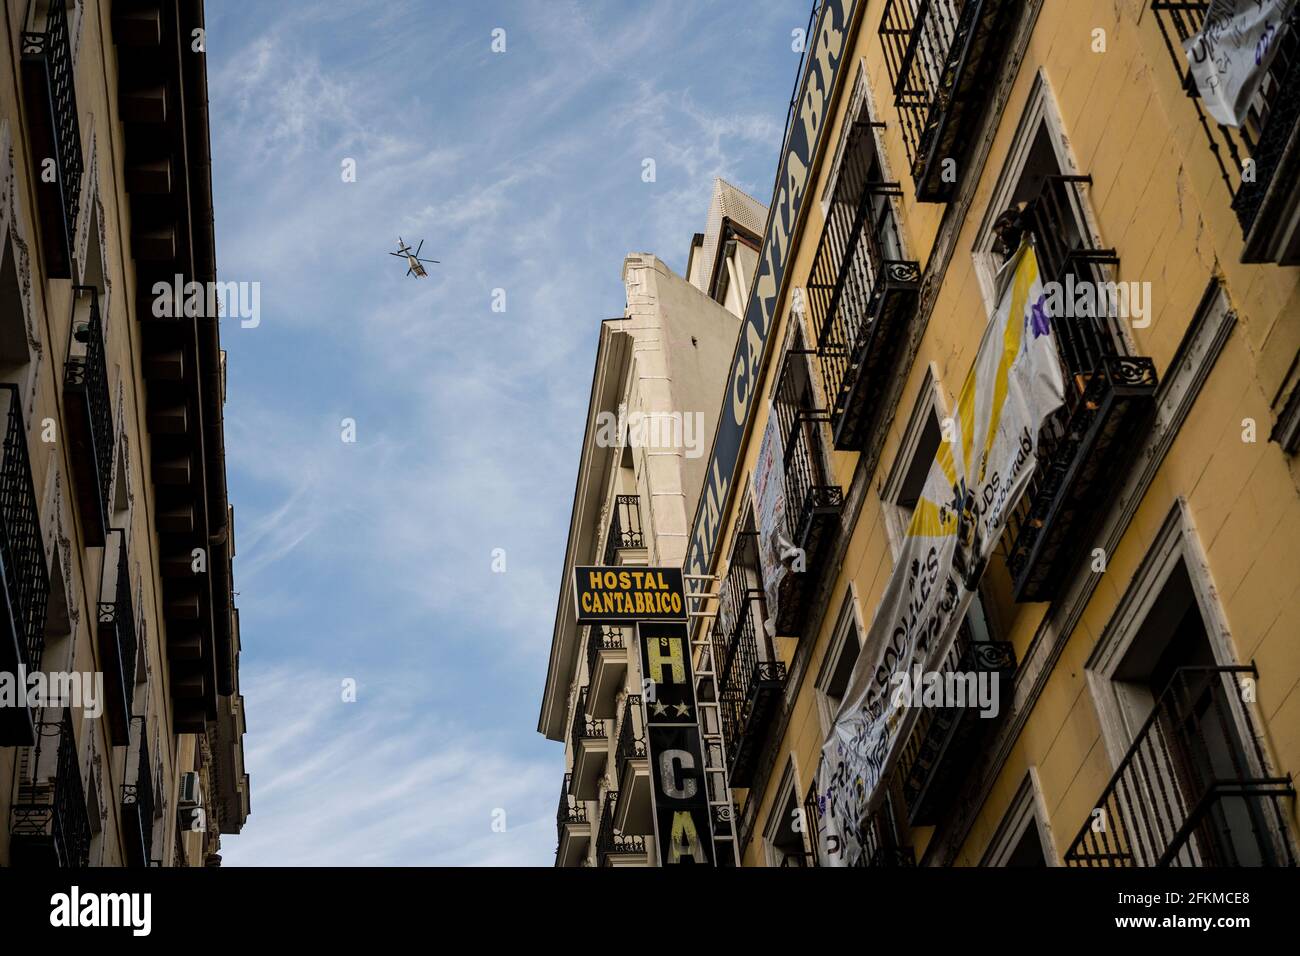 A police helicopter flies over the Hostal Cantabrico on Calle de la Cruz, 3 and 5 "La Ingobernable" which was an occupied and self-managed neighborhood social center. This morning, dozens of activists of La Ingobernable entered illegally and occupied another abandoned building in the Madrid downtown. The building is located on Calle de la Cruz 3 and 5, abandoned since 2016 and owned by the Fernández Luengo brothers, known for their Marco Aldany franchise. Despite the eviction attempts by the Spanish Police, dozens of protesters were able to prevent it. Stock Photo